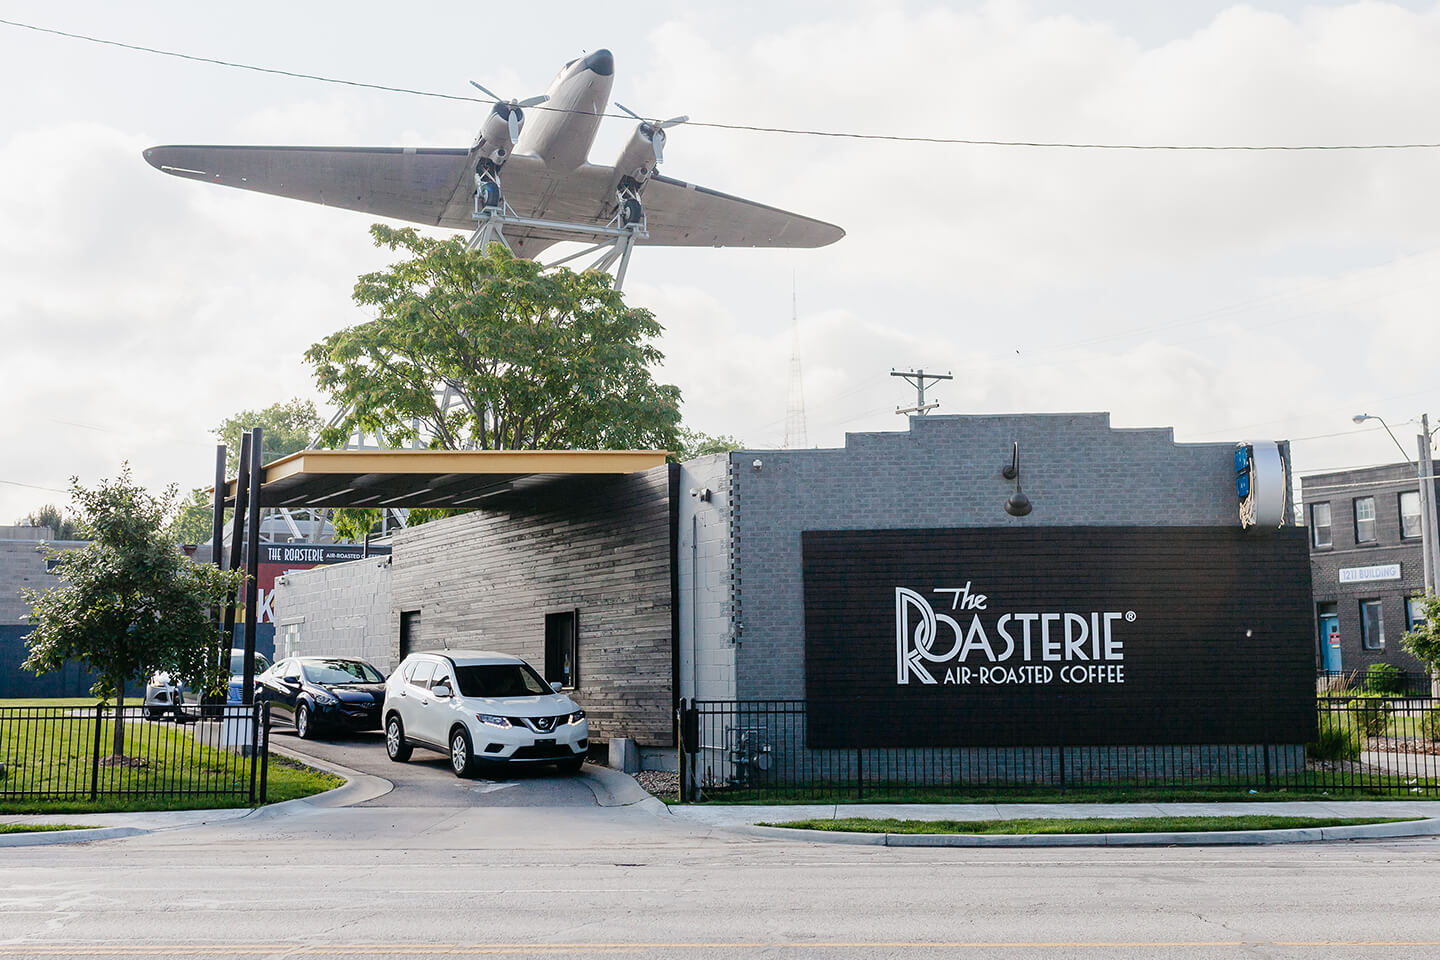 The Roasterie air-roasted coffee drive thru location. There is a massive model airplane hanging above drive thru. 